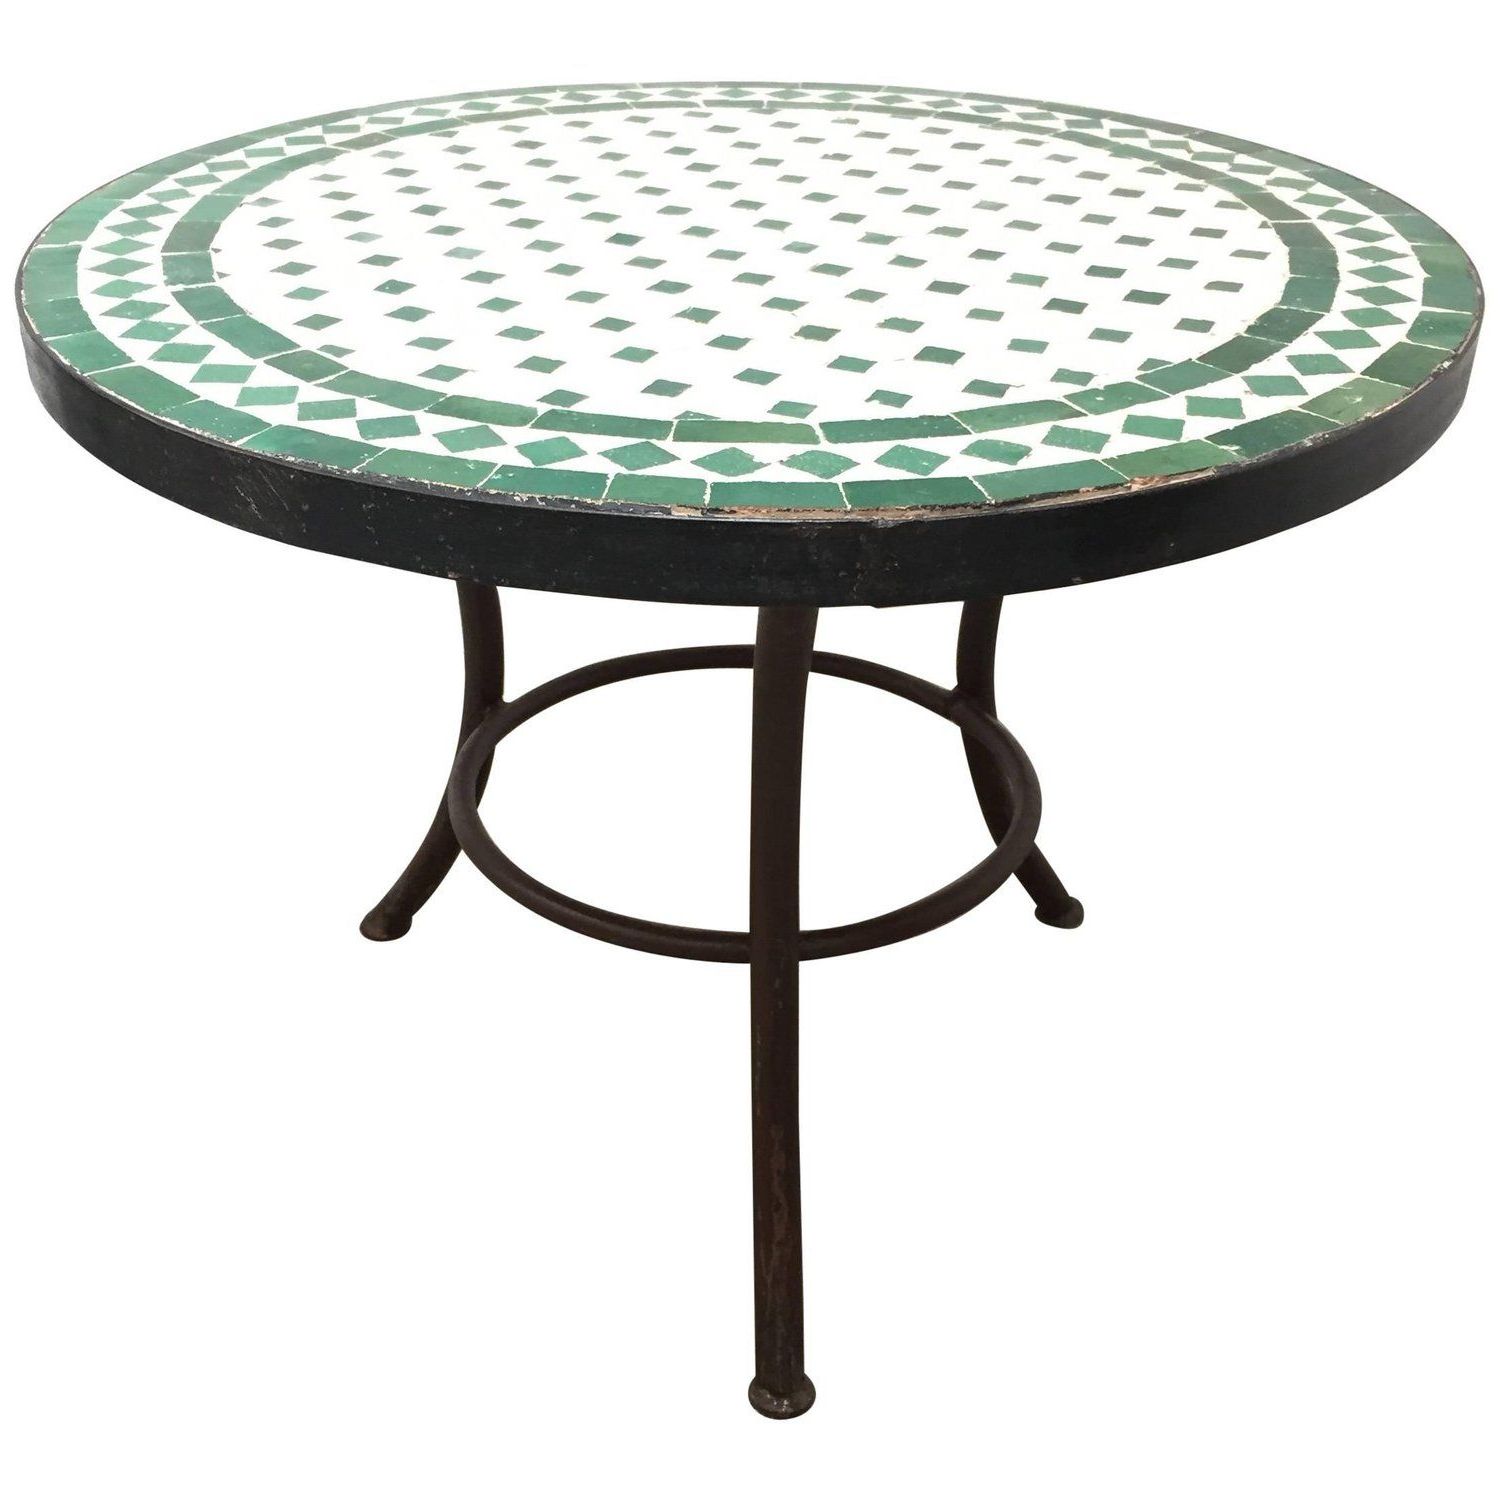 Famous Moroccan Mosaic Tile Outdoor Side Table On Low Iron Base Green And Intended For Dragonfly Mosaic Outdoor Accent Tables (View 12 of 15)